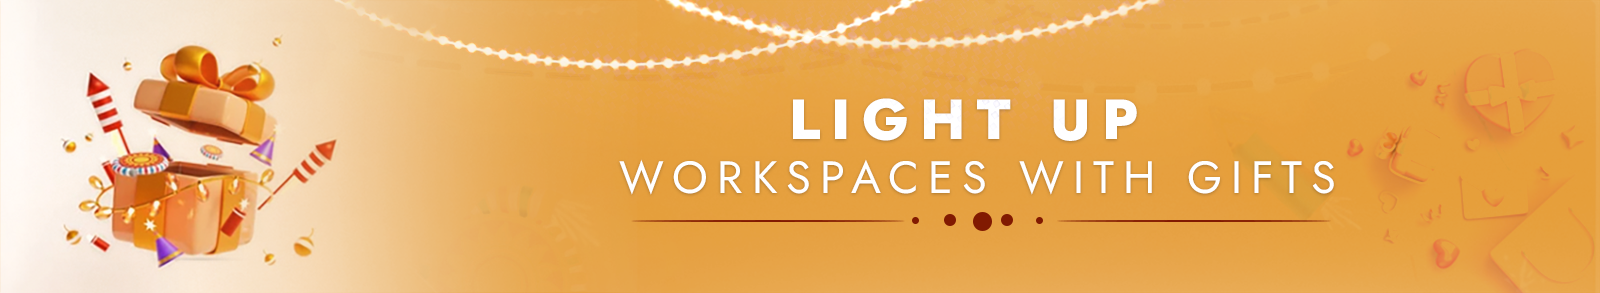 Light Up Workspaces with Gifts